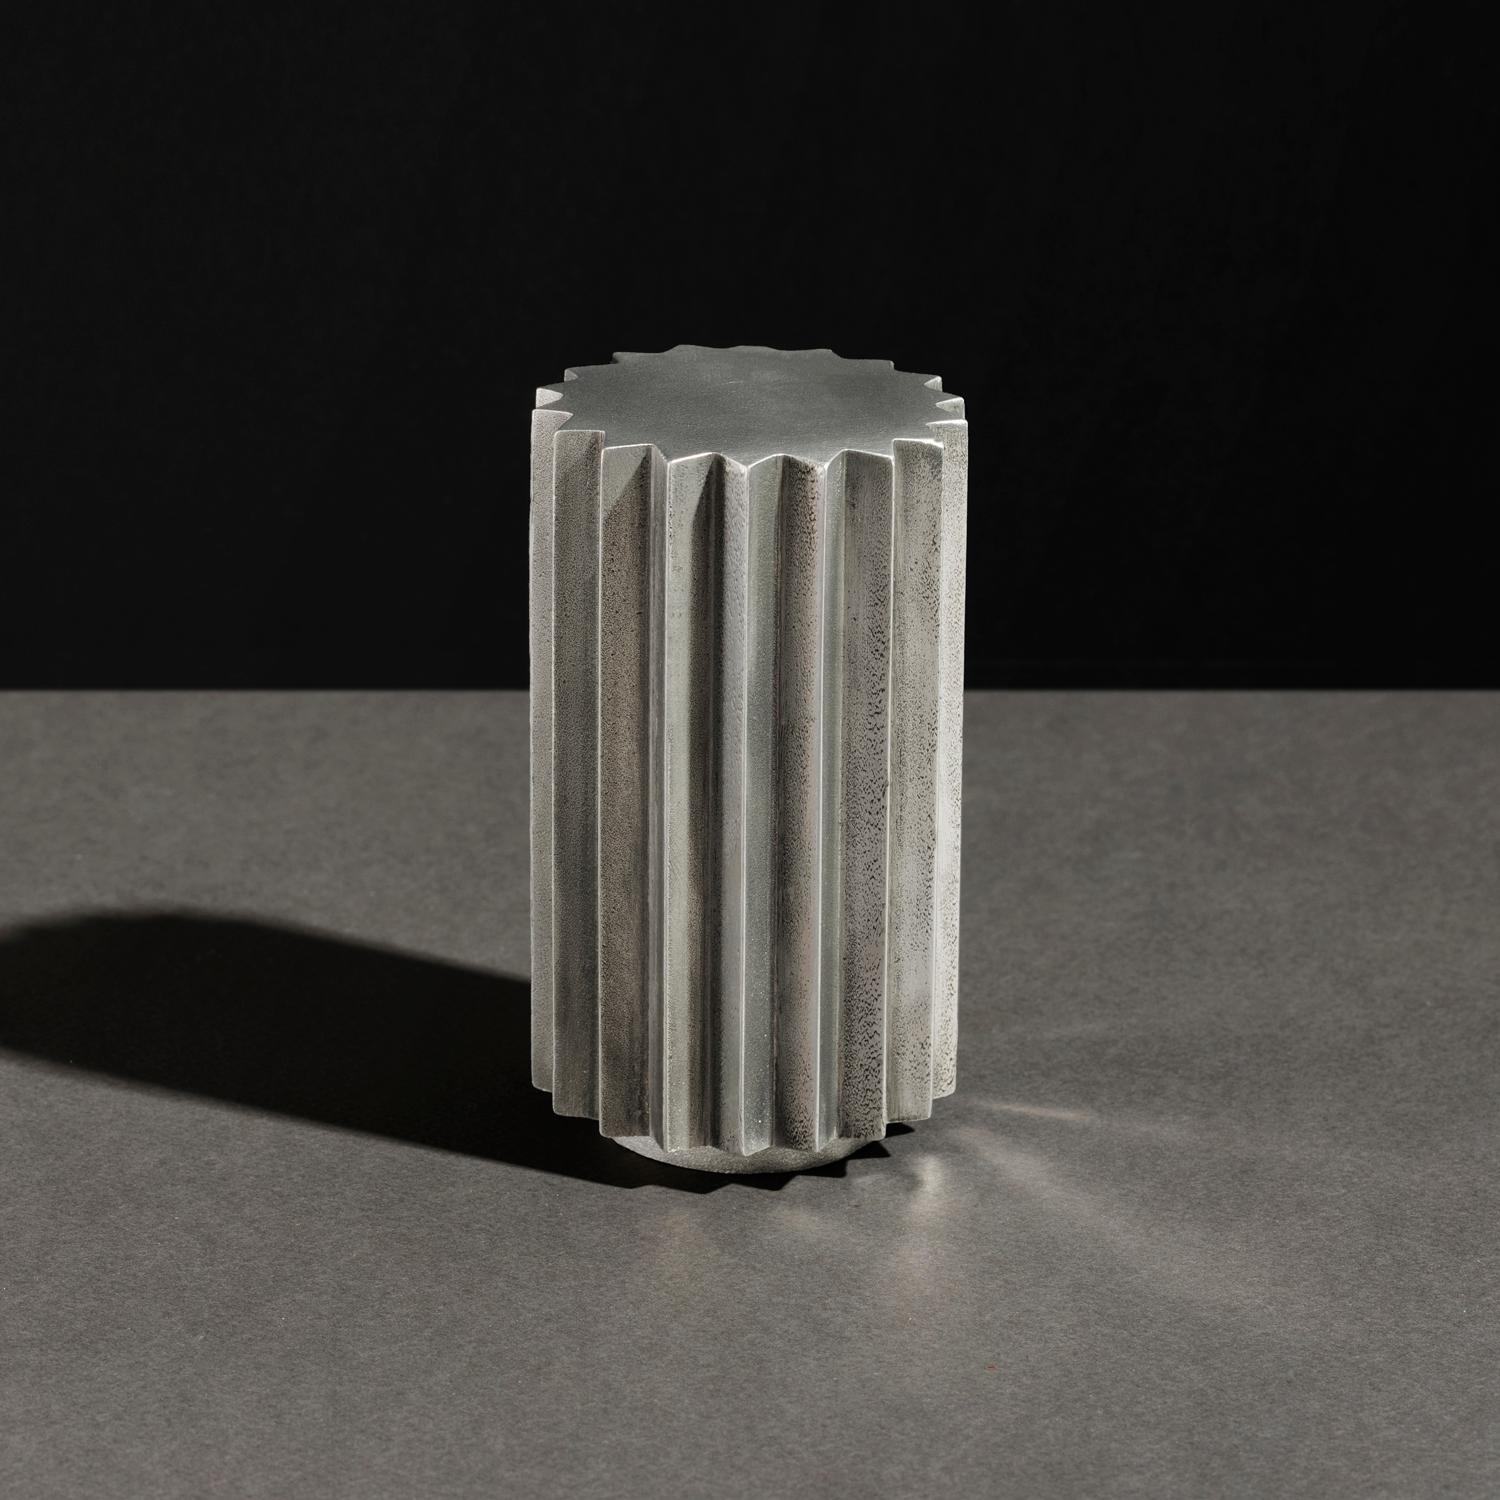 Doris Aluminum Side Table by Fred and Juul
Dimensions: Ø 36 x H 60 cm.
Materials: Aluminum.

Available in bronze and aluminum. Also available in different measurements. Custom sizes, materials or finishes are available. Please contact us.

Side